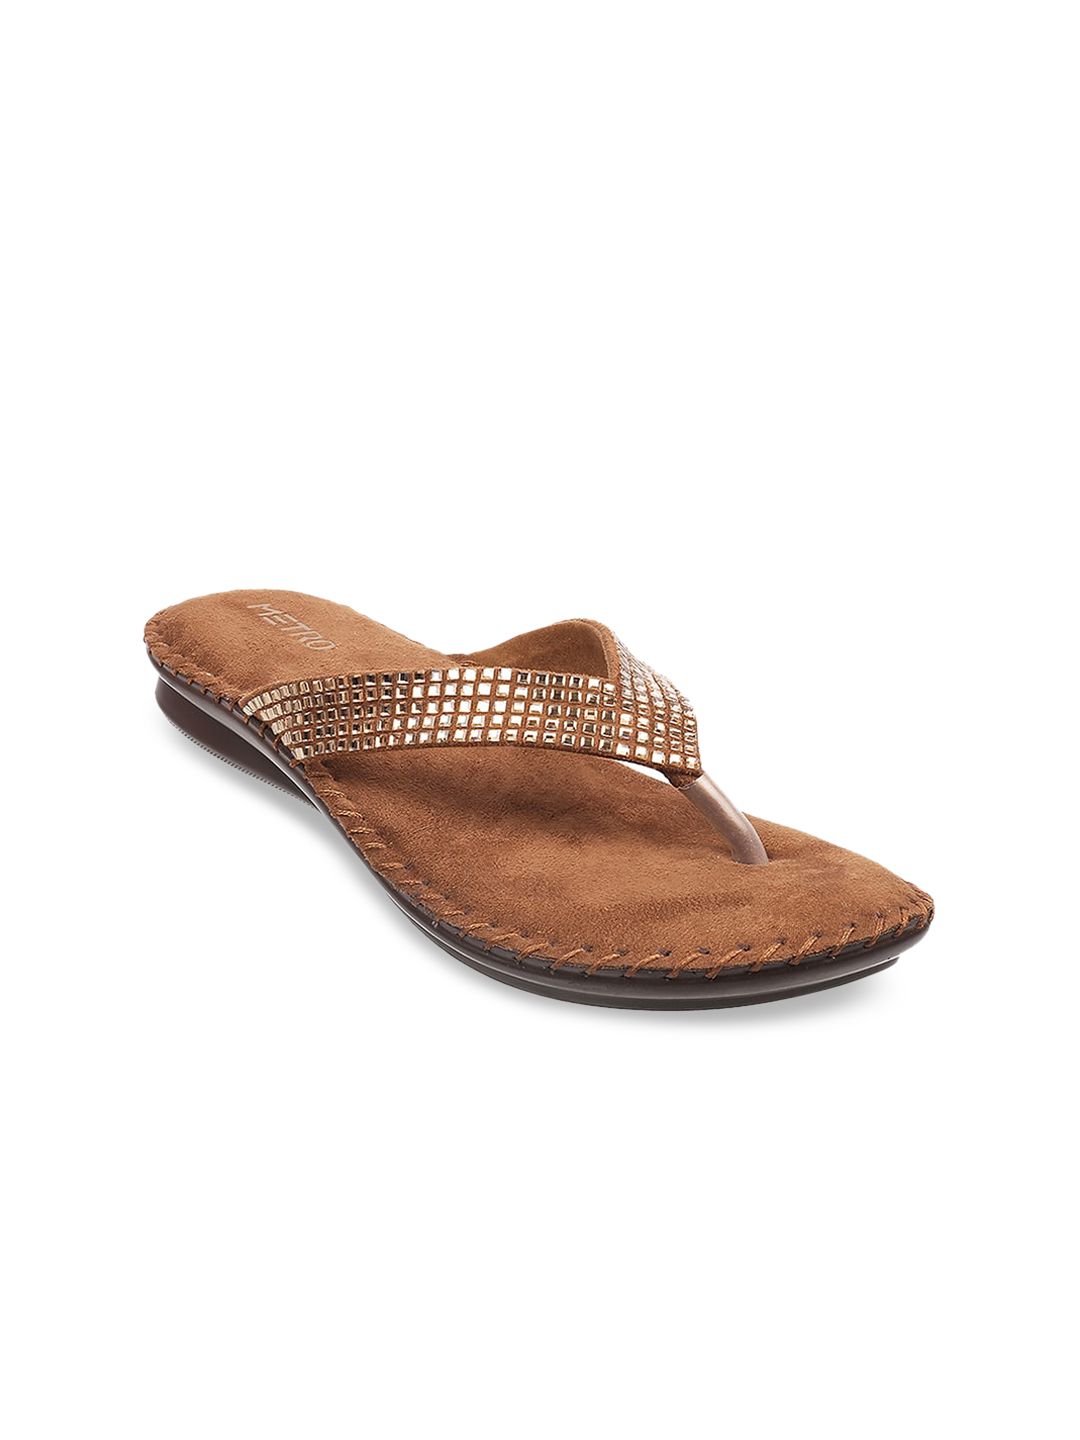 Metro Women Gold-Toned & Tan Brown Embellished Open Toe Flats Price in India